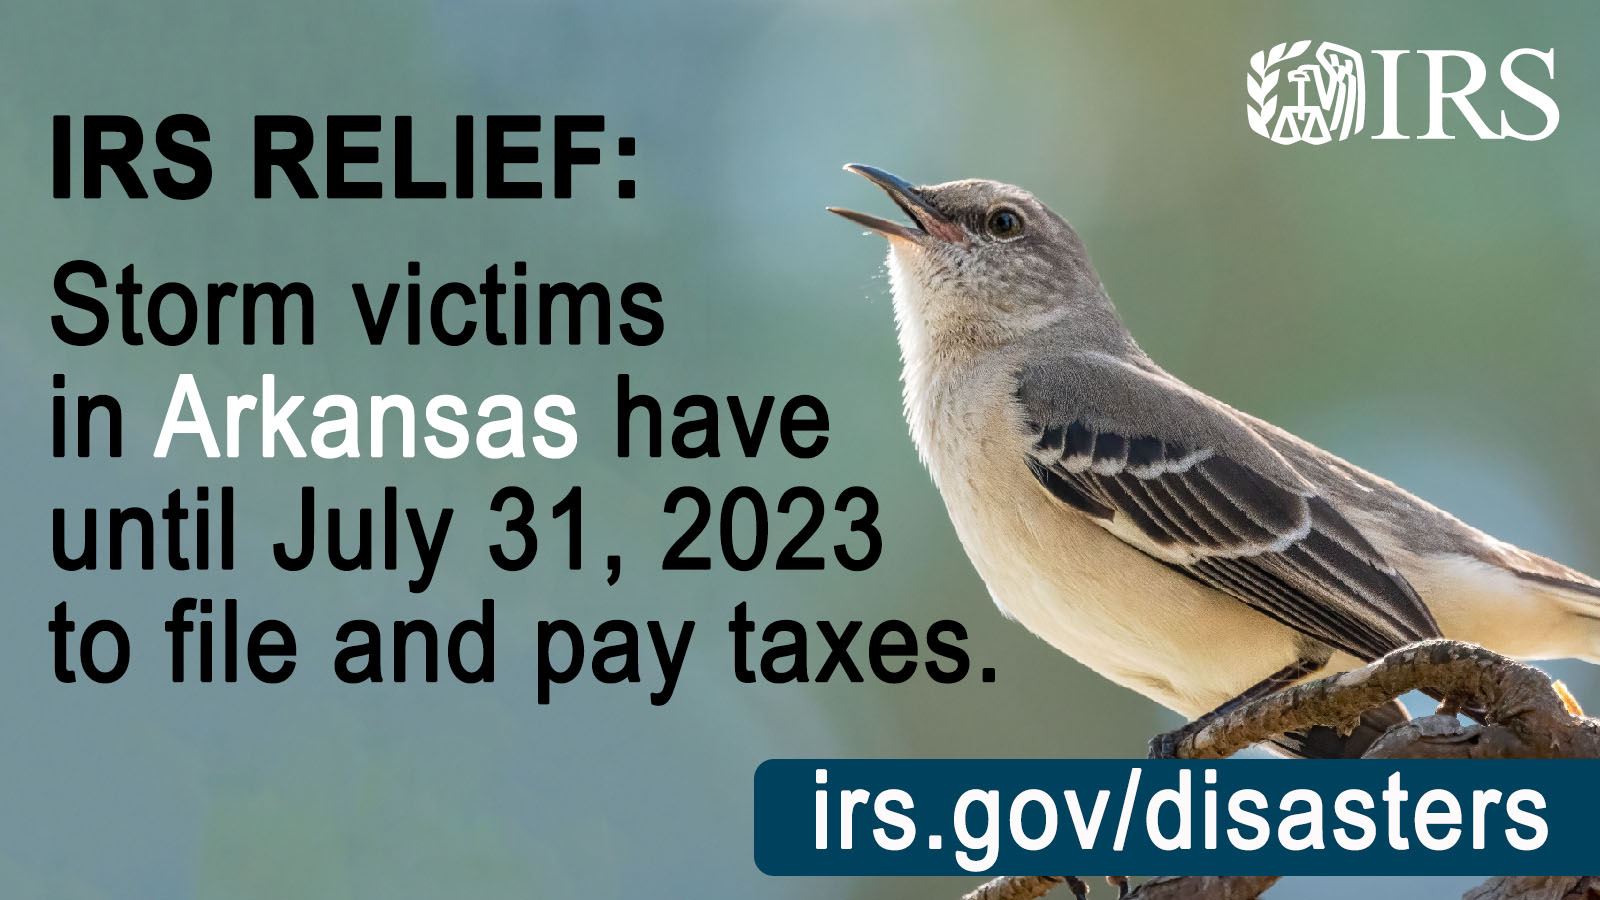 Mocking bird perched on a stick. Text: ‘IRS RELIEF: Storm victims in Arkansas have until July 31, 2023 to file and pay taxes.’ Irs.gov/disasters url displayed. IRS logo. 